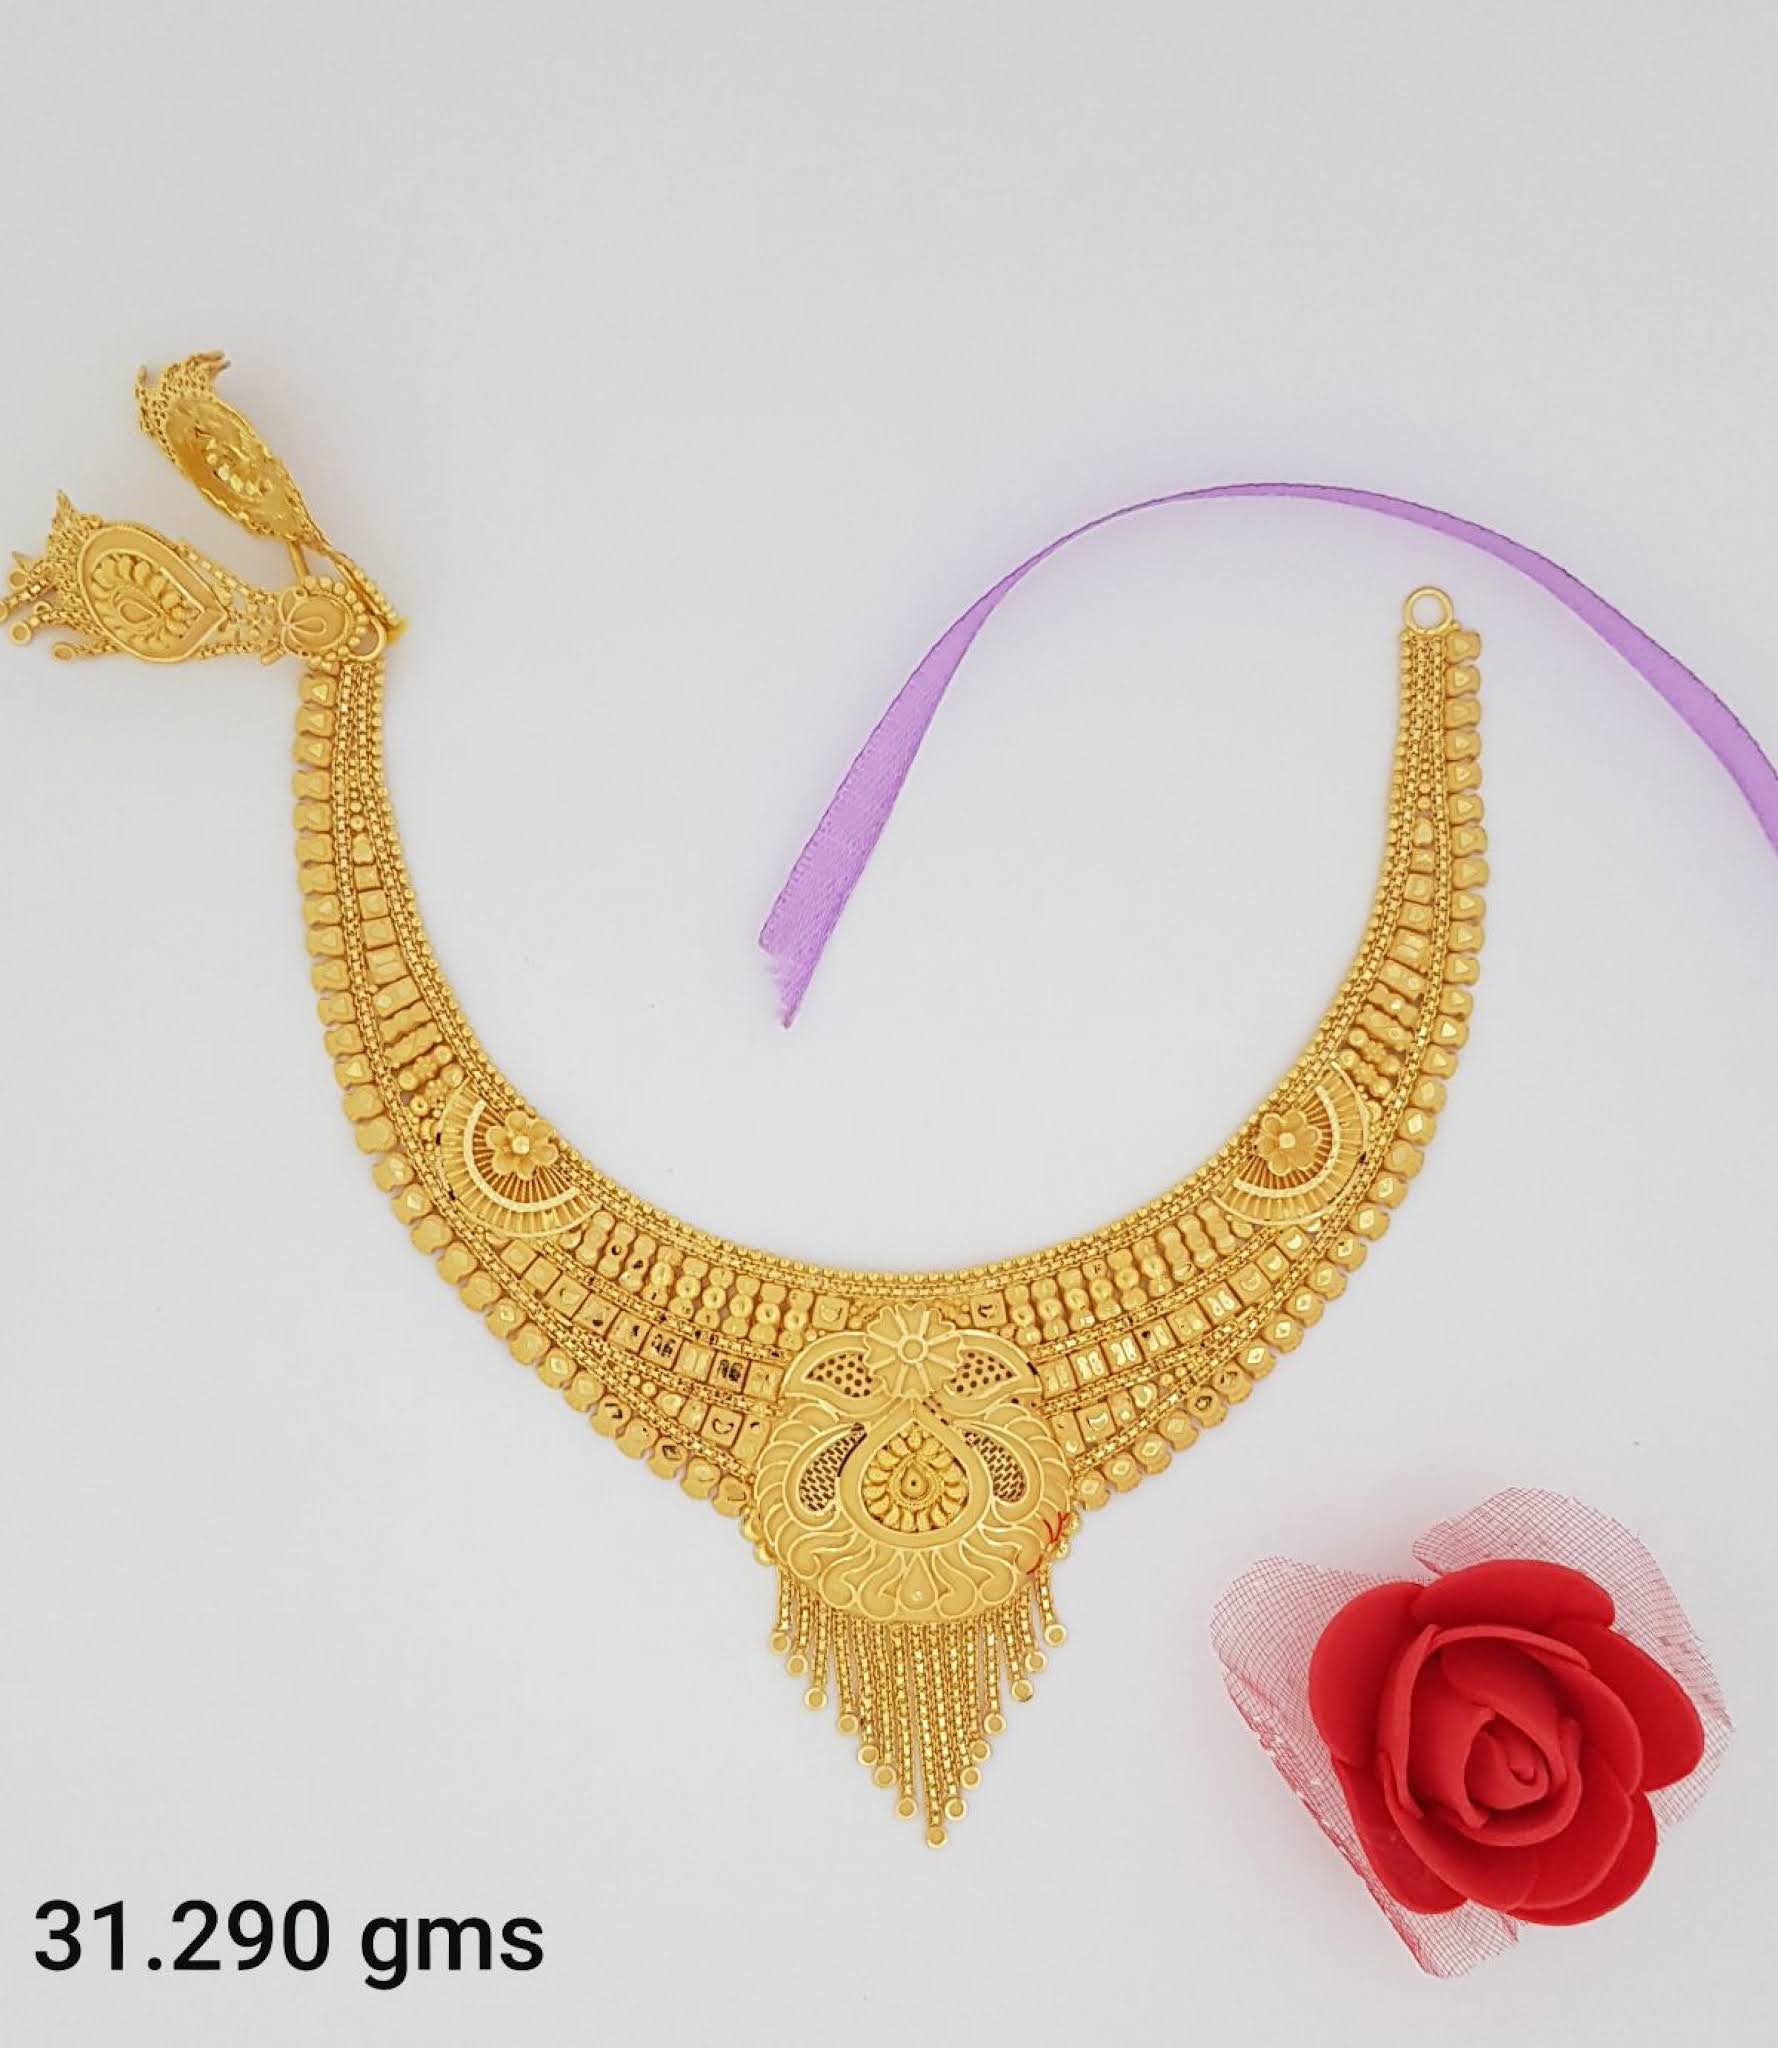 latest 22kt light weight gold necklace designs with weight , necklace for bridal wedding